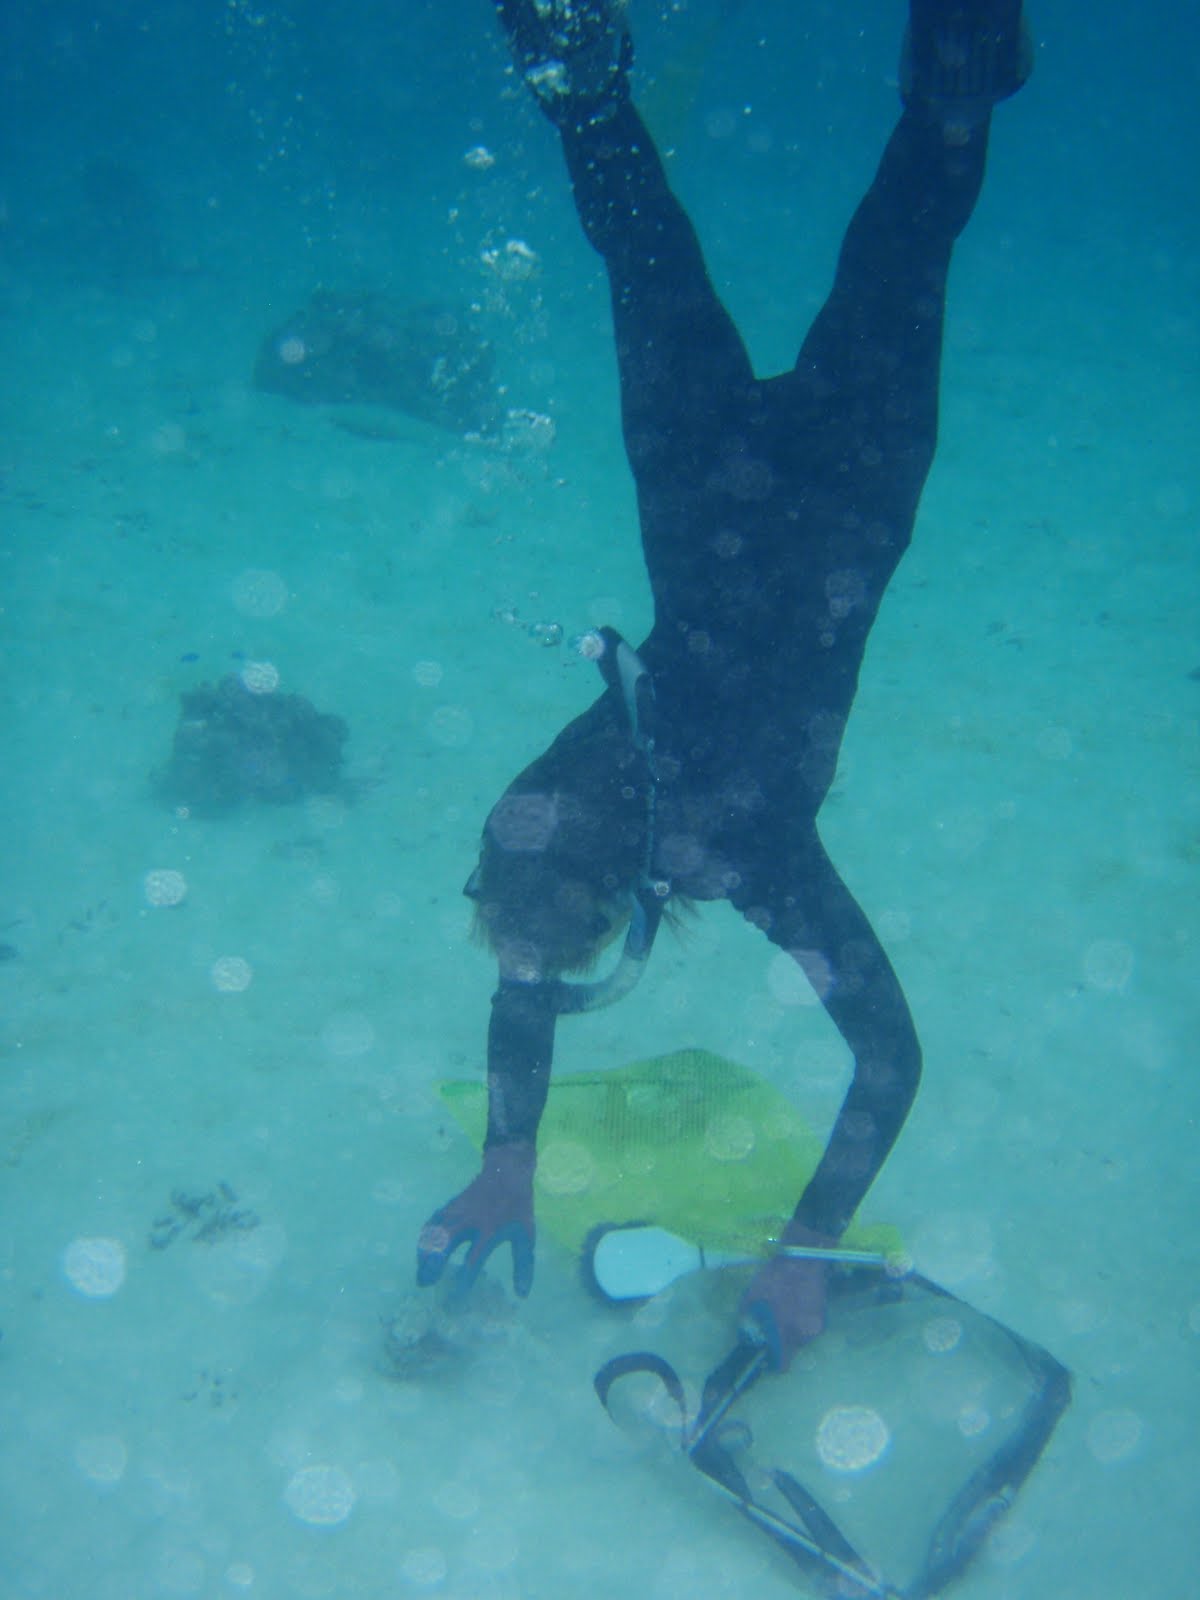 Mandy snorkeling upside down to get something from the bottom